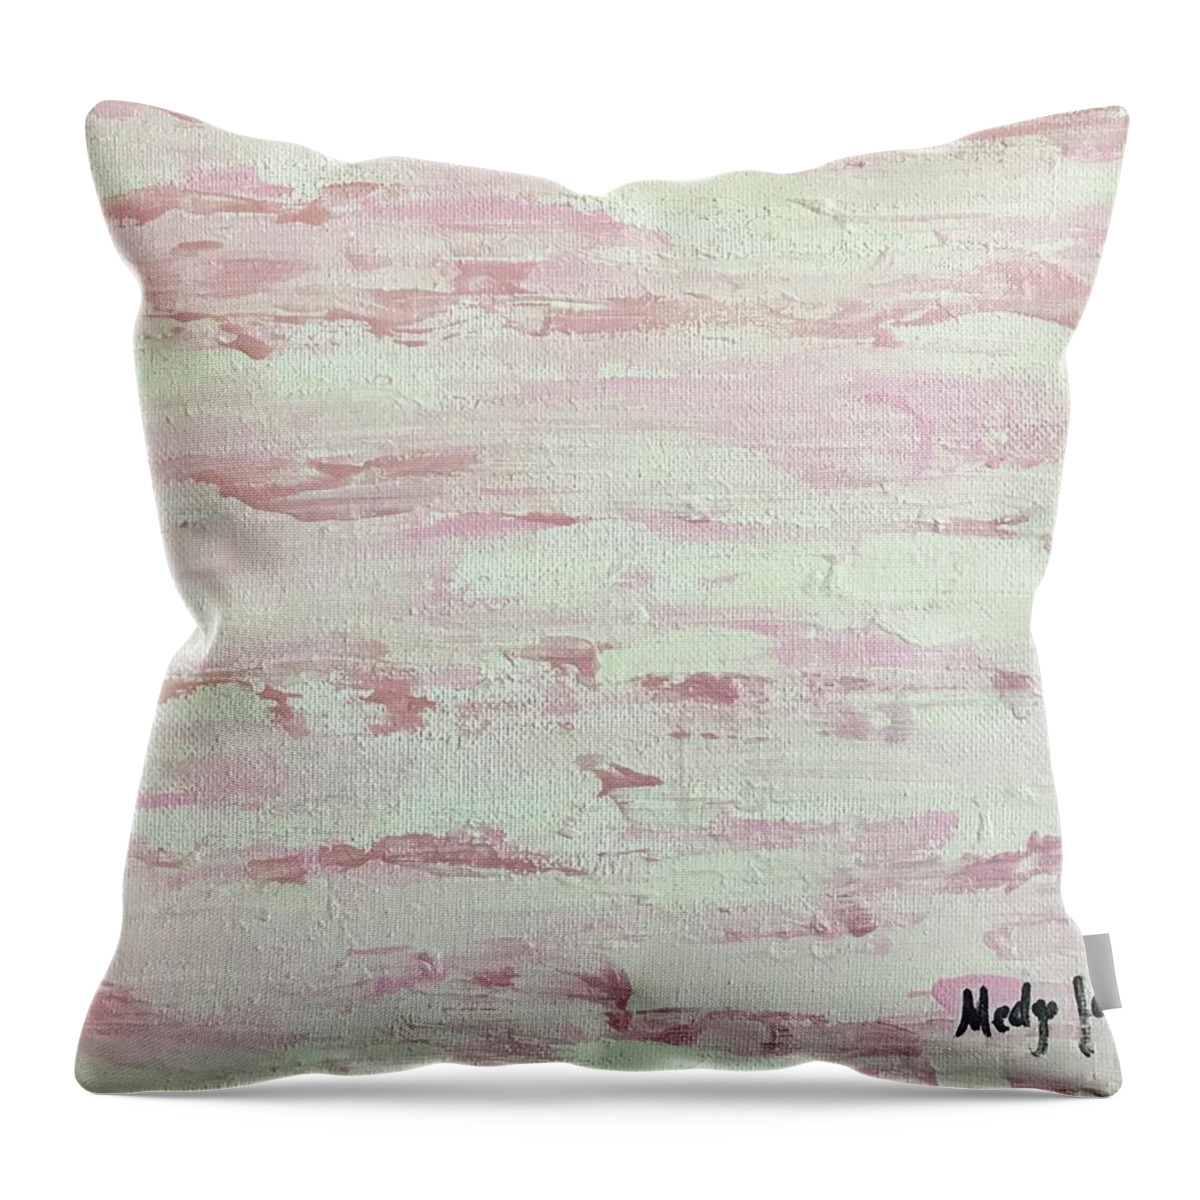 Pink Throw Pillow featuring the painting Kindness in Pink by Medge Jaspan